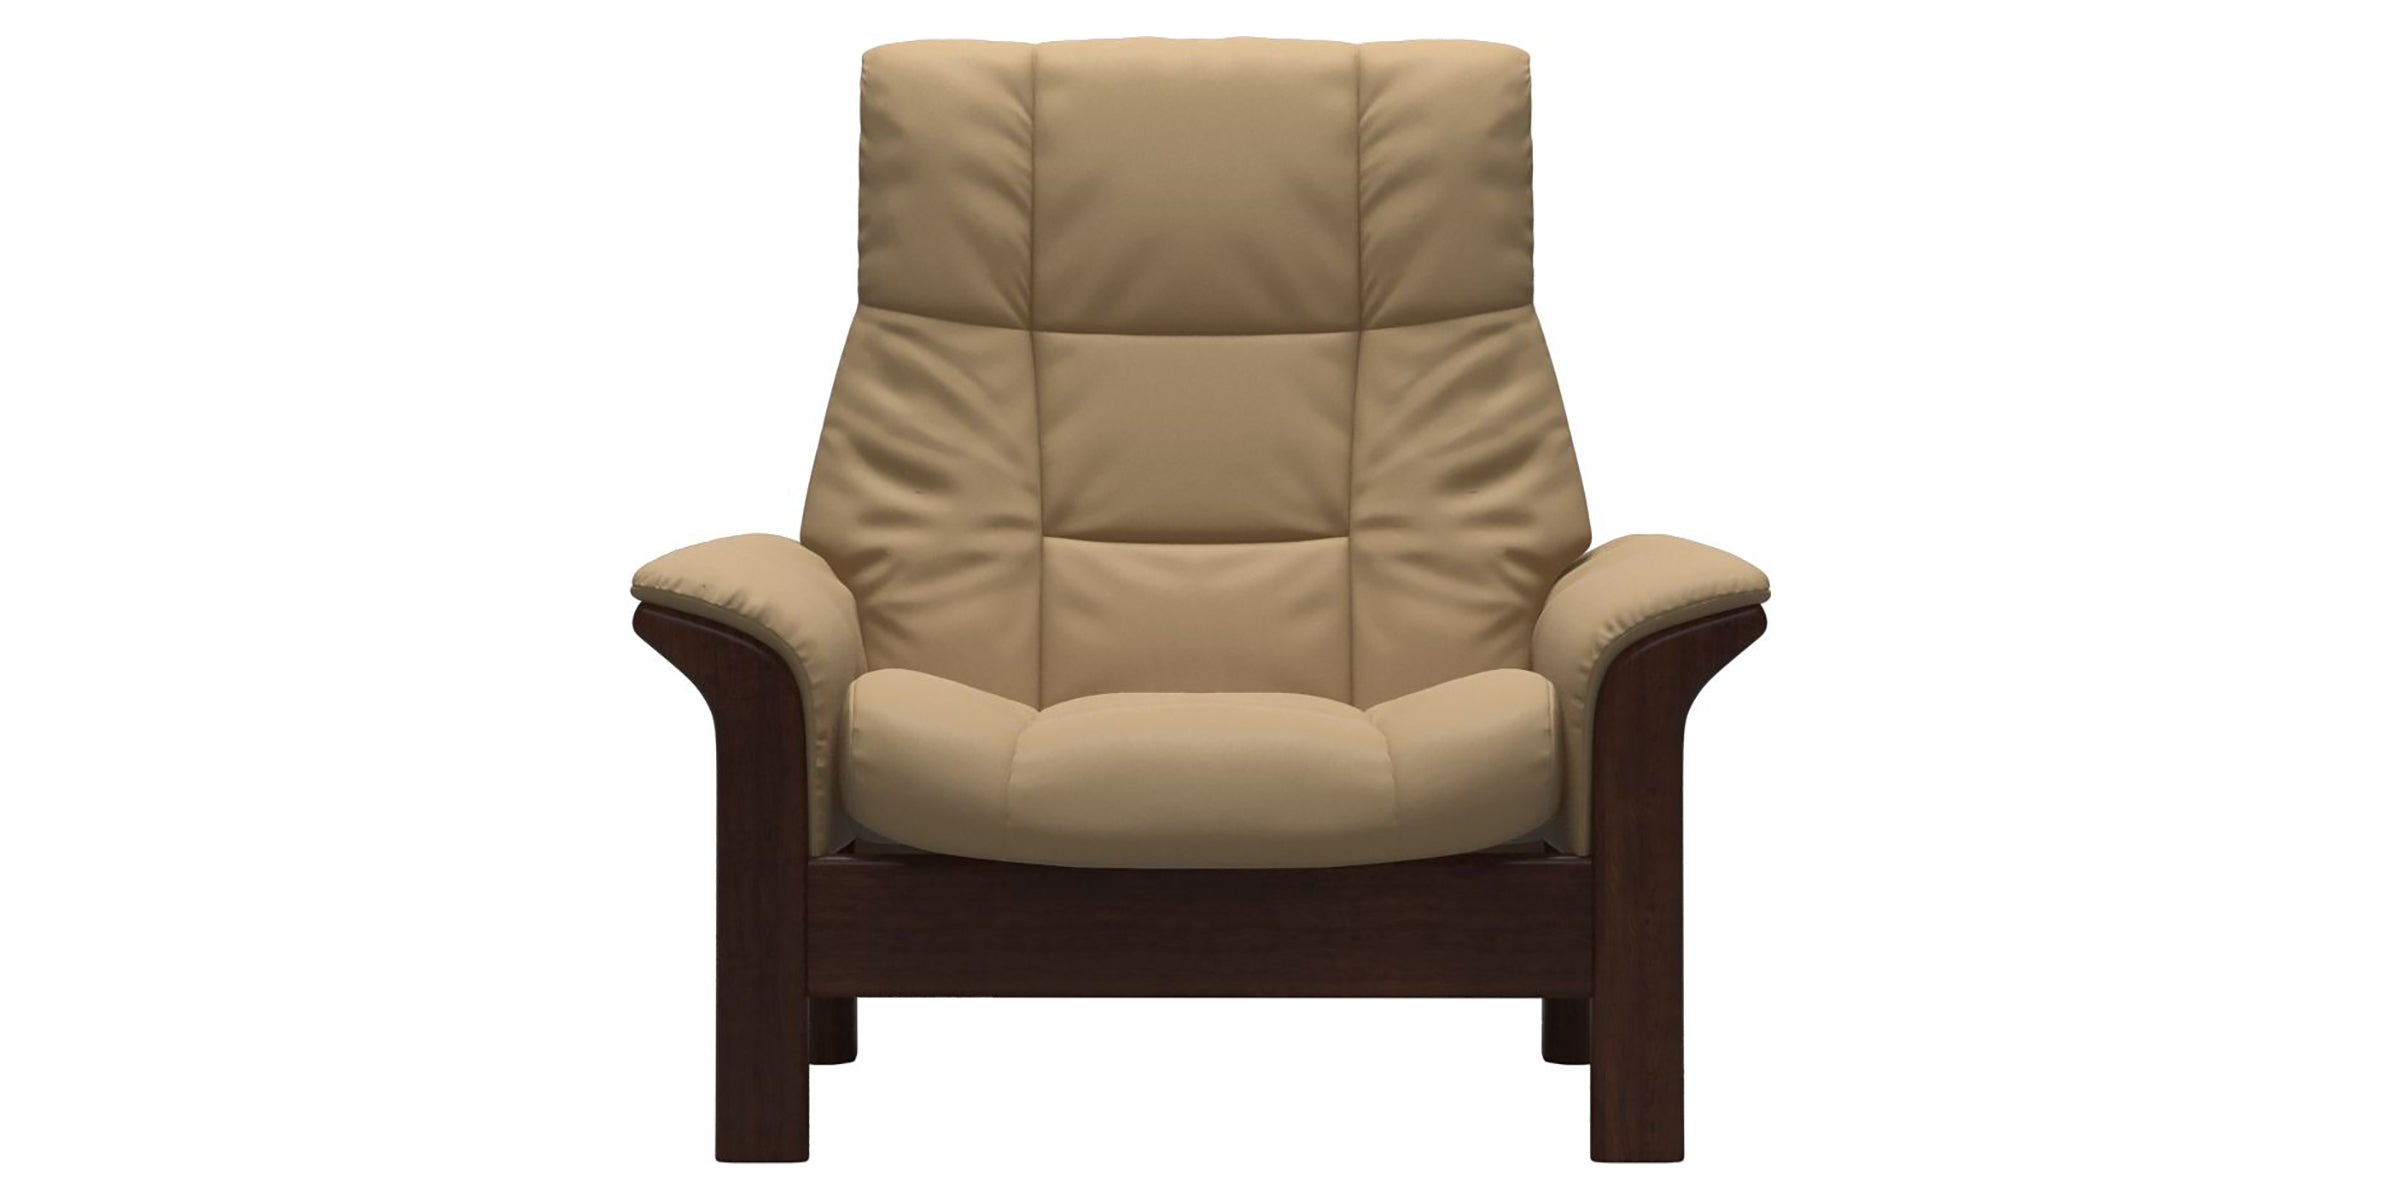 Paloma Leather Sand and Brown Base | Stressless Buckingham High Back Chair | Valley Ridge Furniture